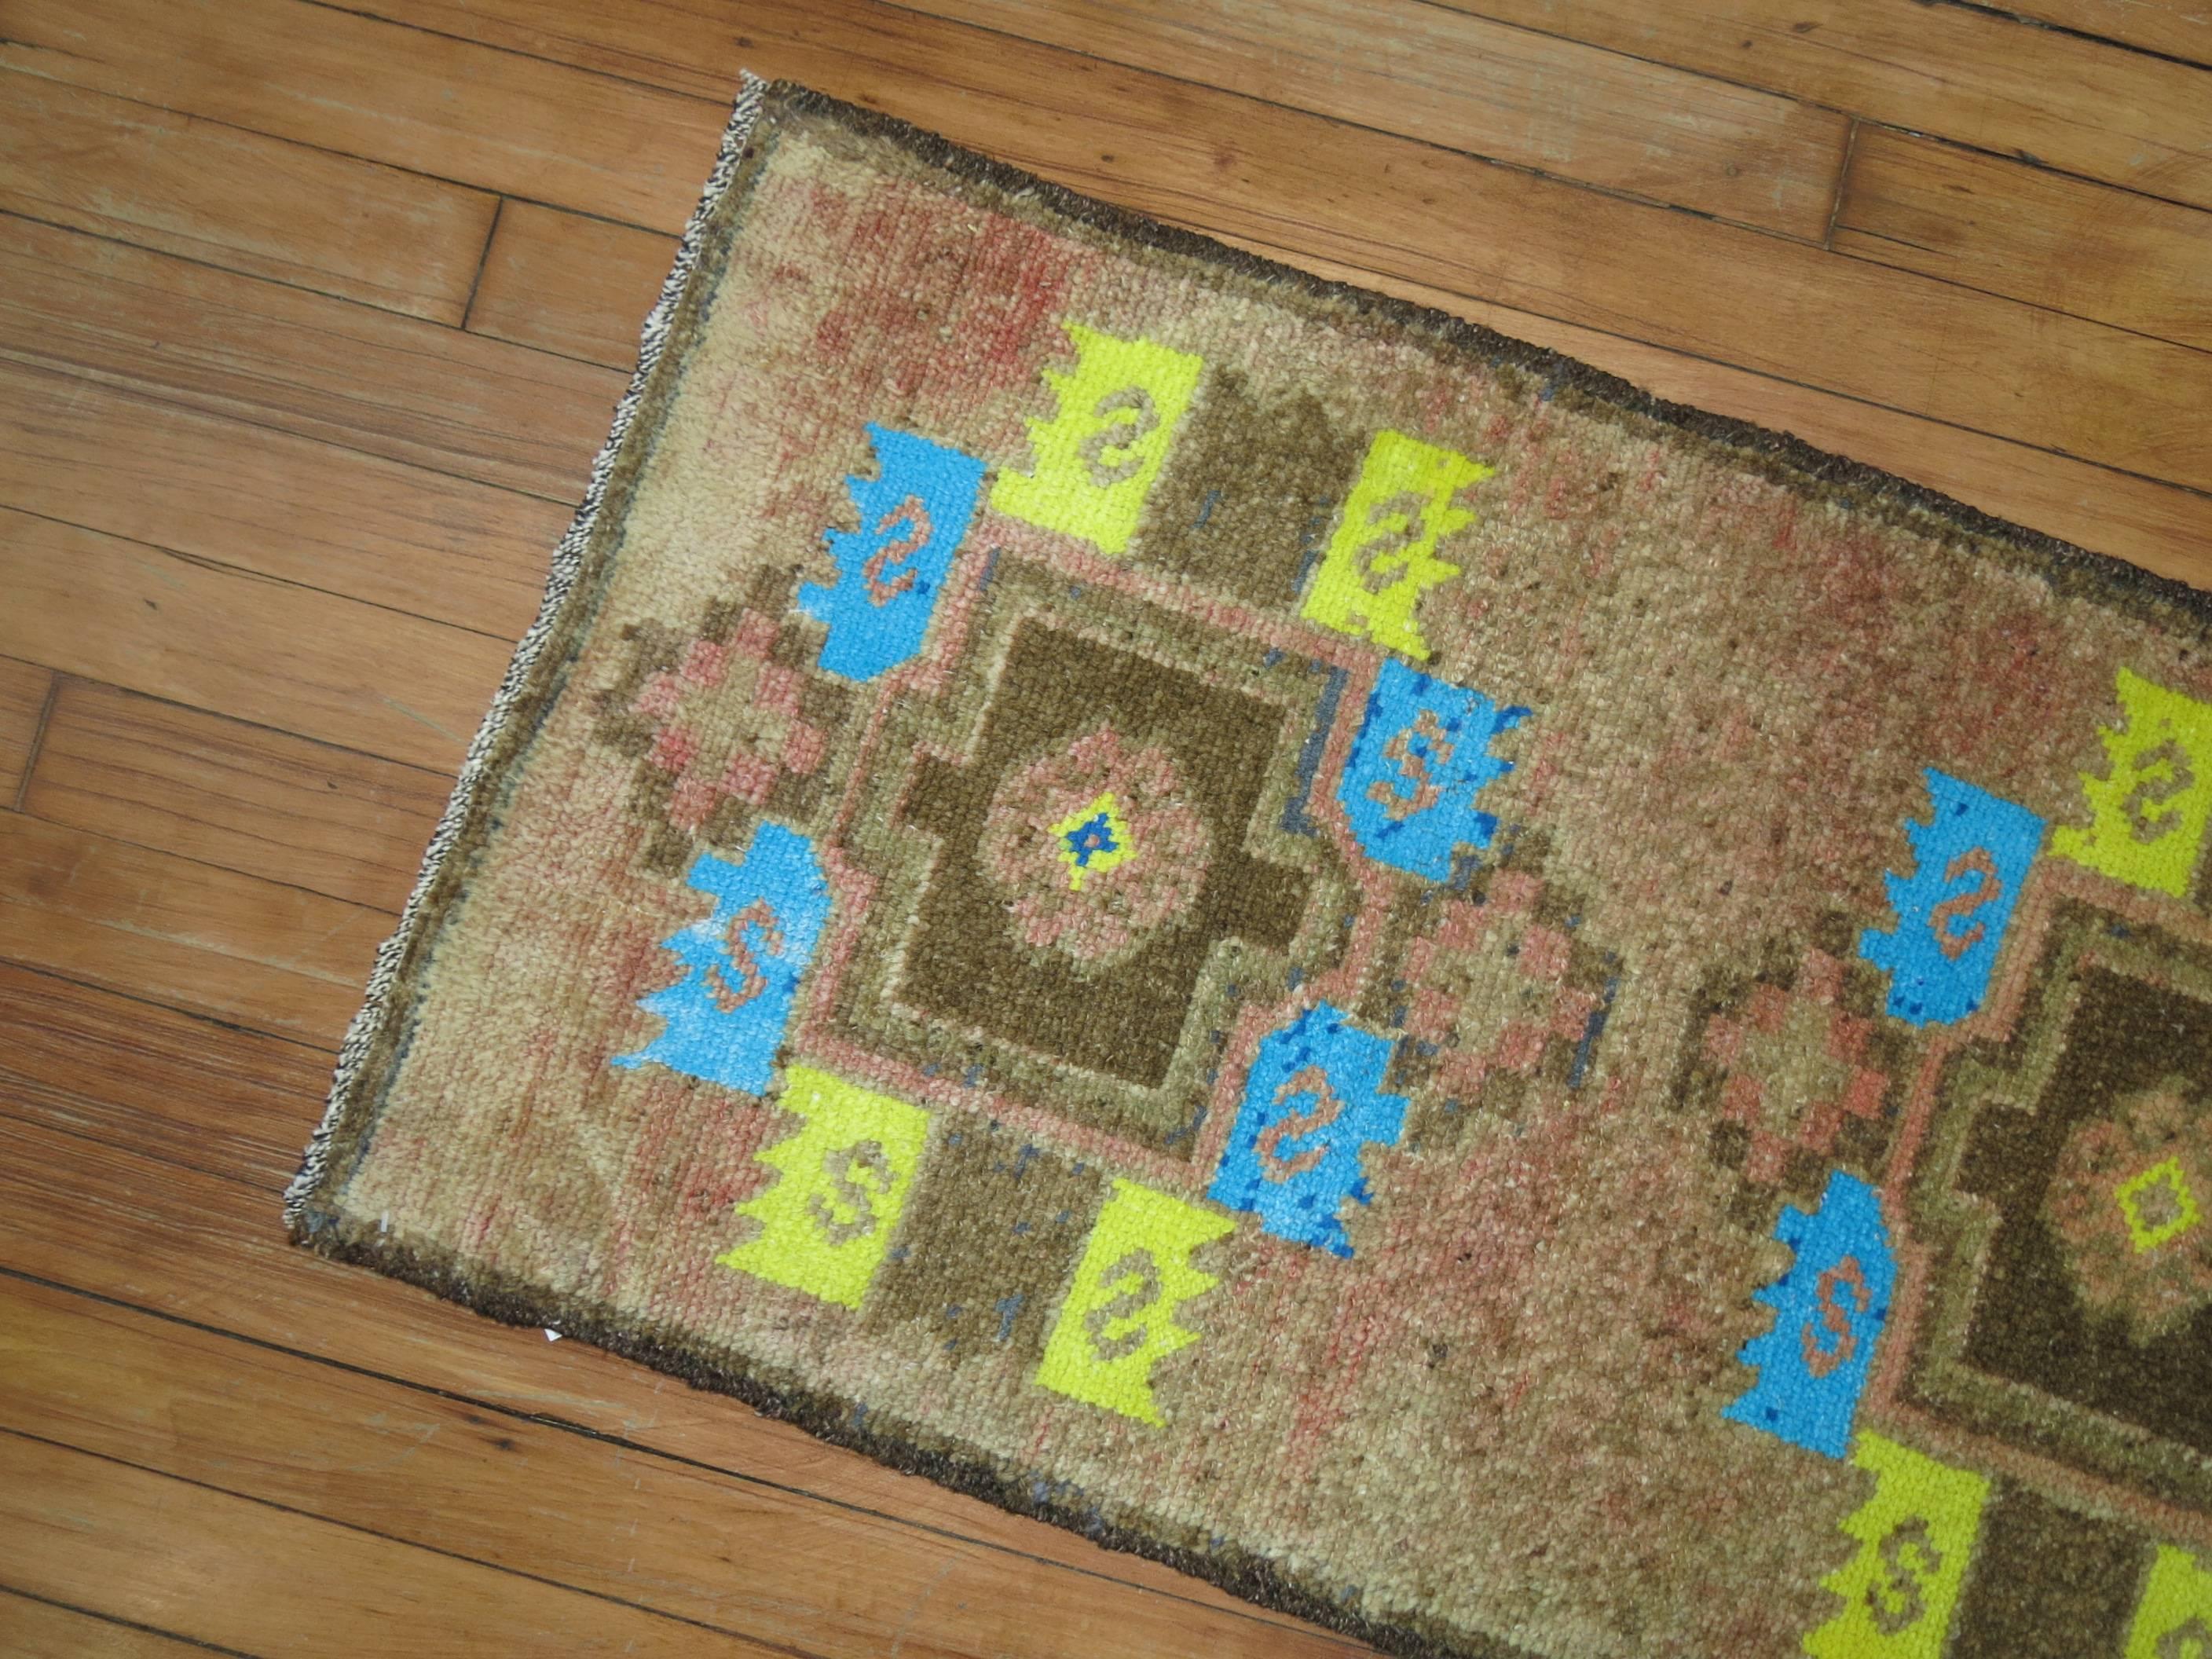 Electric blue and yellow-green cotton-colored accents highlight this fascinating vintage Turkish rug we have in our collection.

1'7'' x 3'2''